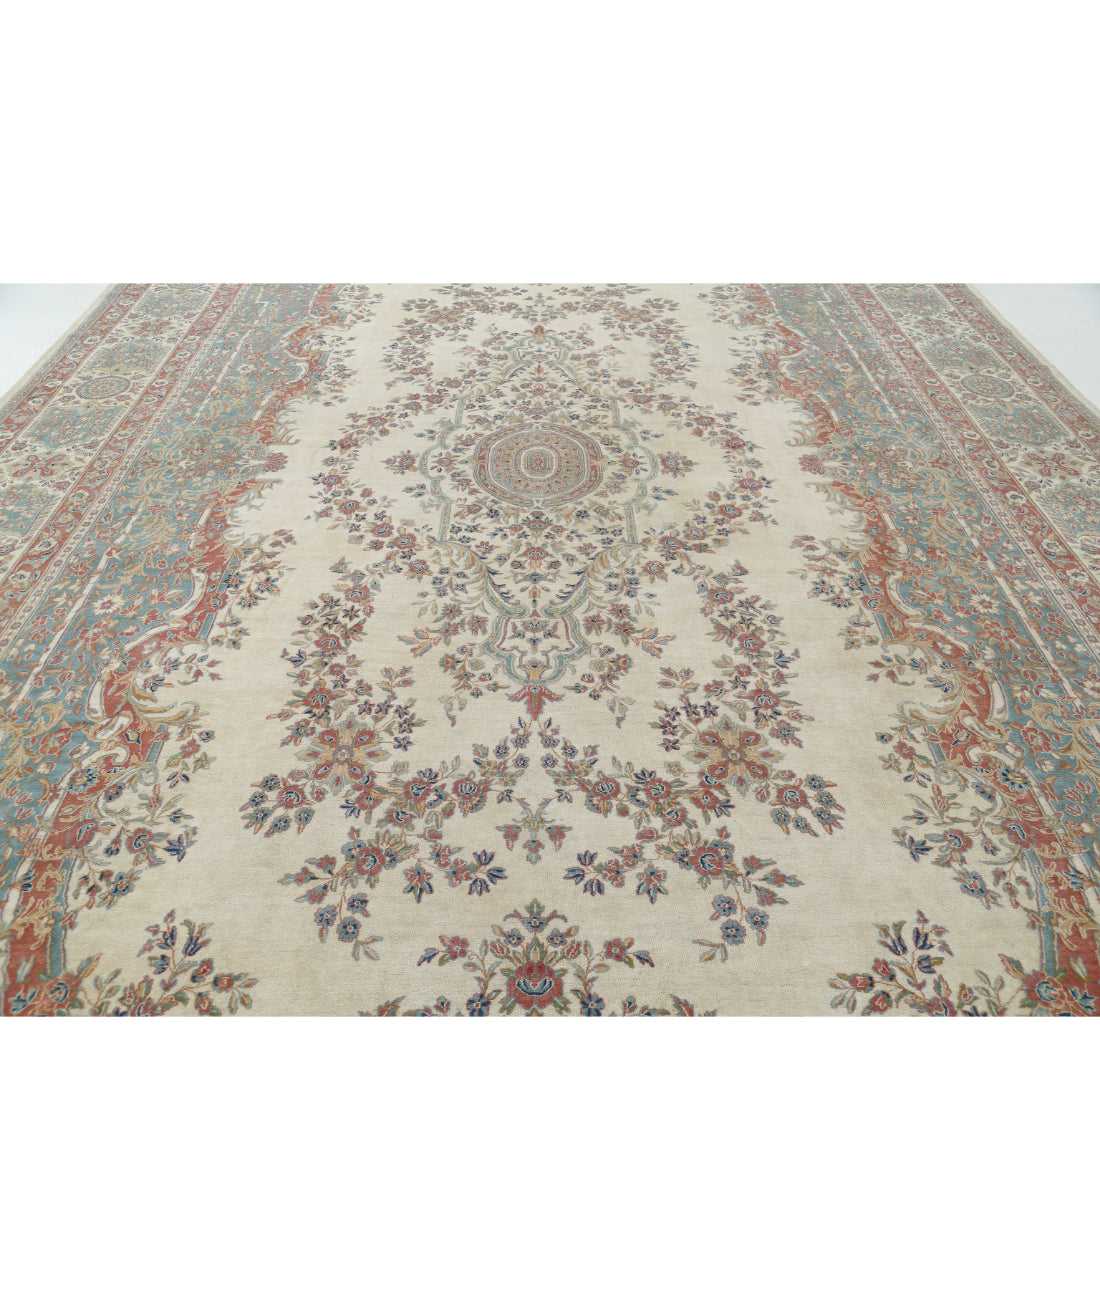 Hand Knotted Vintage Persian Kerman Wool Rug - 11'8'' x 19'3'' 11'8'' x 19'3'' (350 X 578) / Ivory / Blue